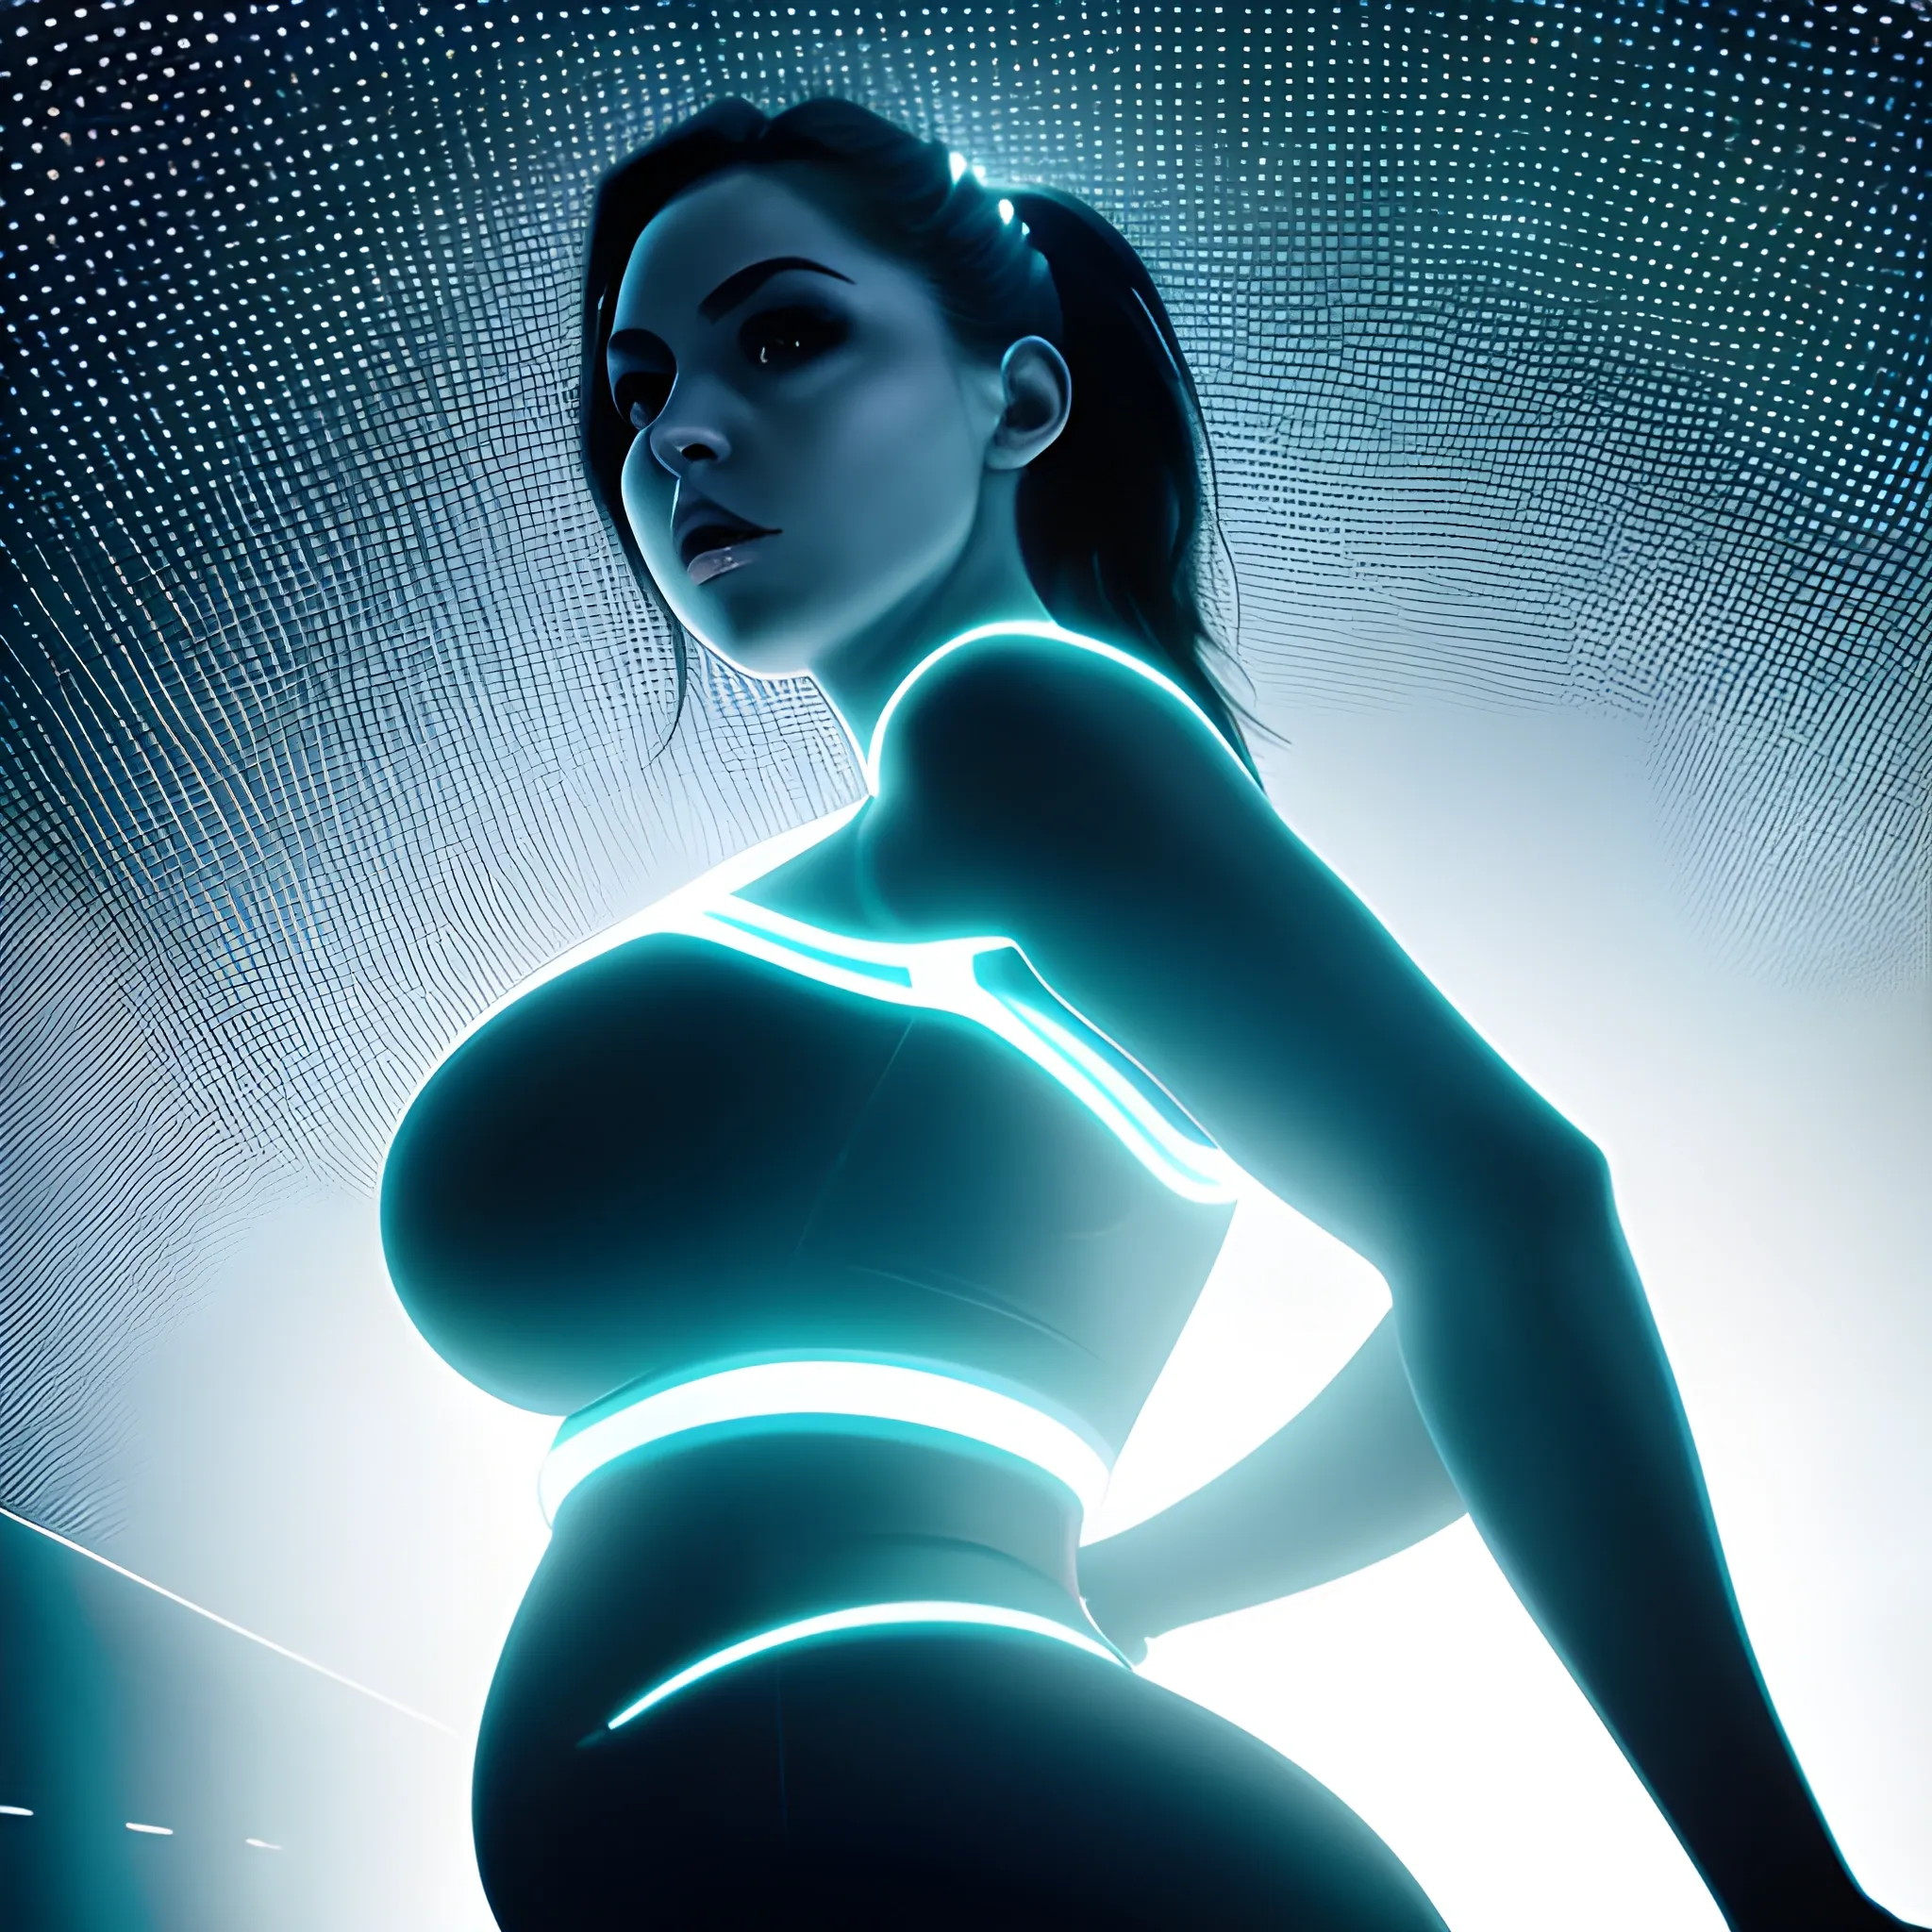 hyper bright backlight outlining darkened undistinguishable  feminine silhouette of hyper dynamic hyper hourglass figured hyper slim waist hyper big bosomed hyper busty hyper voluptuous hyper big butt massive thighs arms raised hyper flirtatiously hyper dynamically high above head sexy pose, hyper bright backlight outlining darkened undistinguishable feminine silhouette with arms raised high above head pose, uhd, dslr, hyper bright backlight, high quality, hyper dynamically hyper far zoomed out, hyper quality need for speed underground 2 aesthetic, hyper detailed hyper blinding glowing white lights hyper bright blinding white lights from center of night time city background, HD, 8k, photography